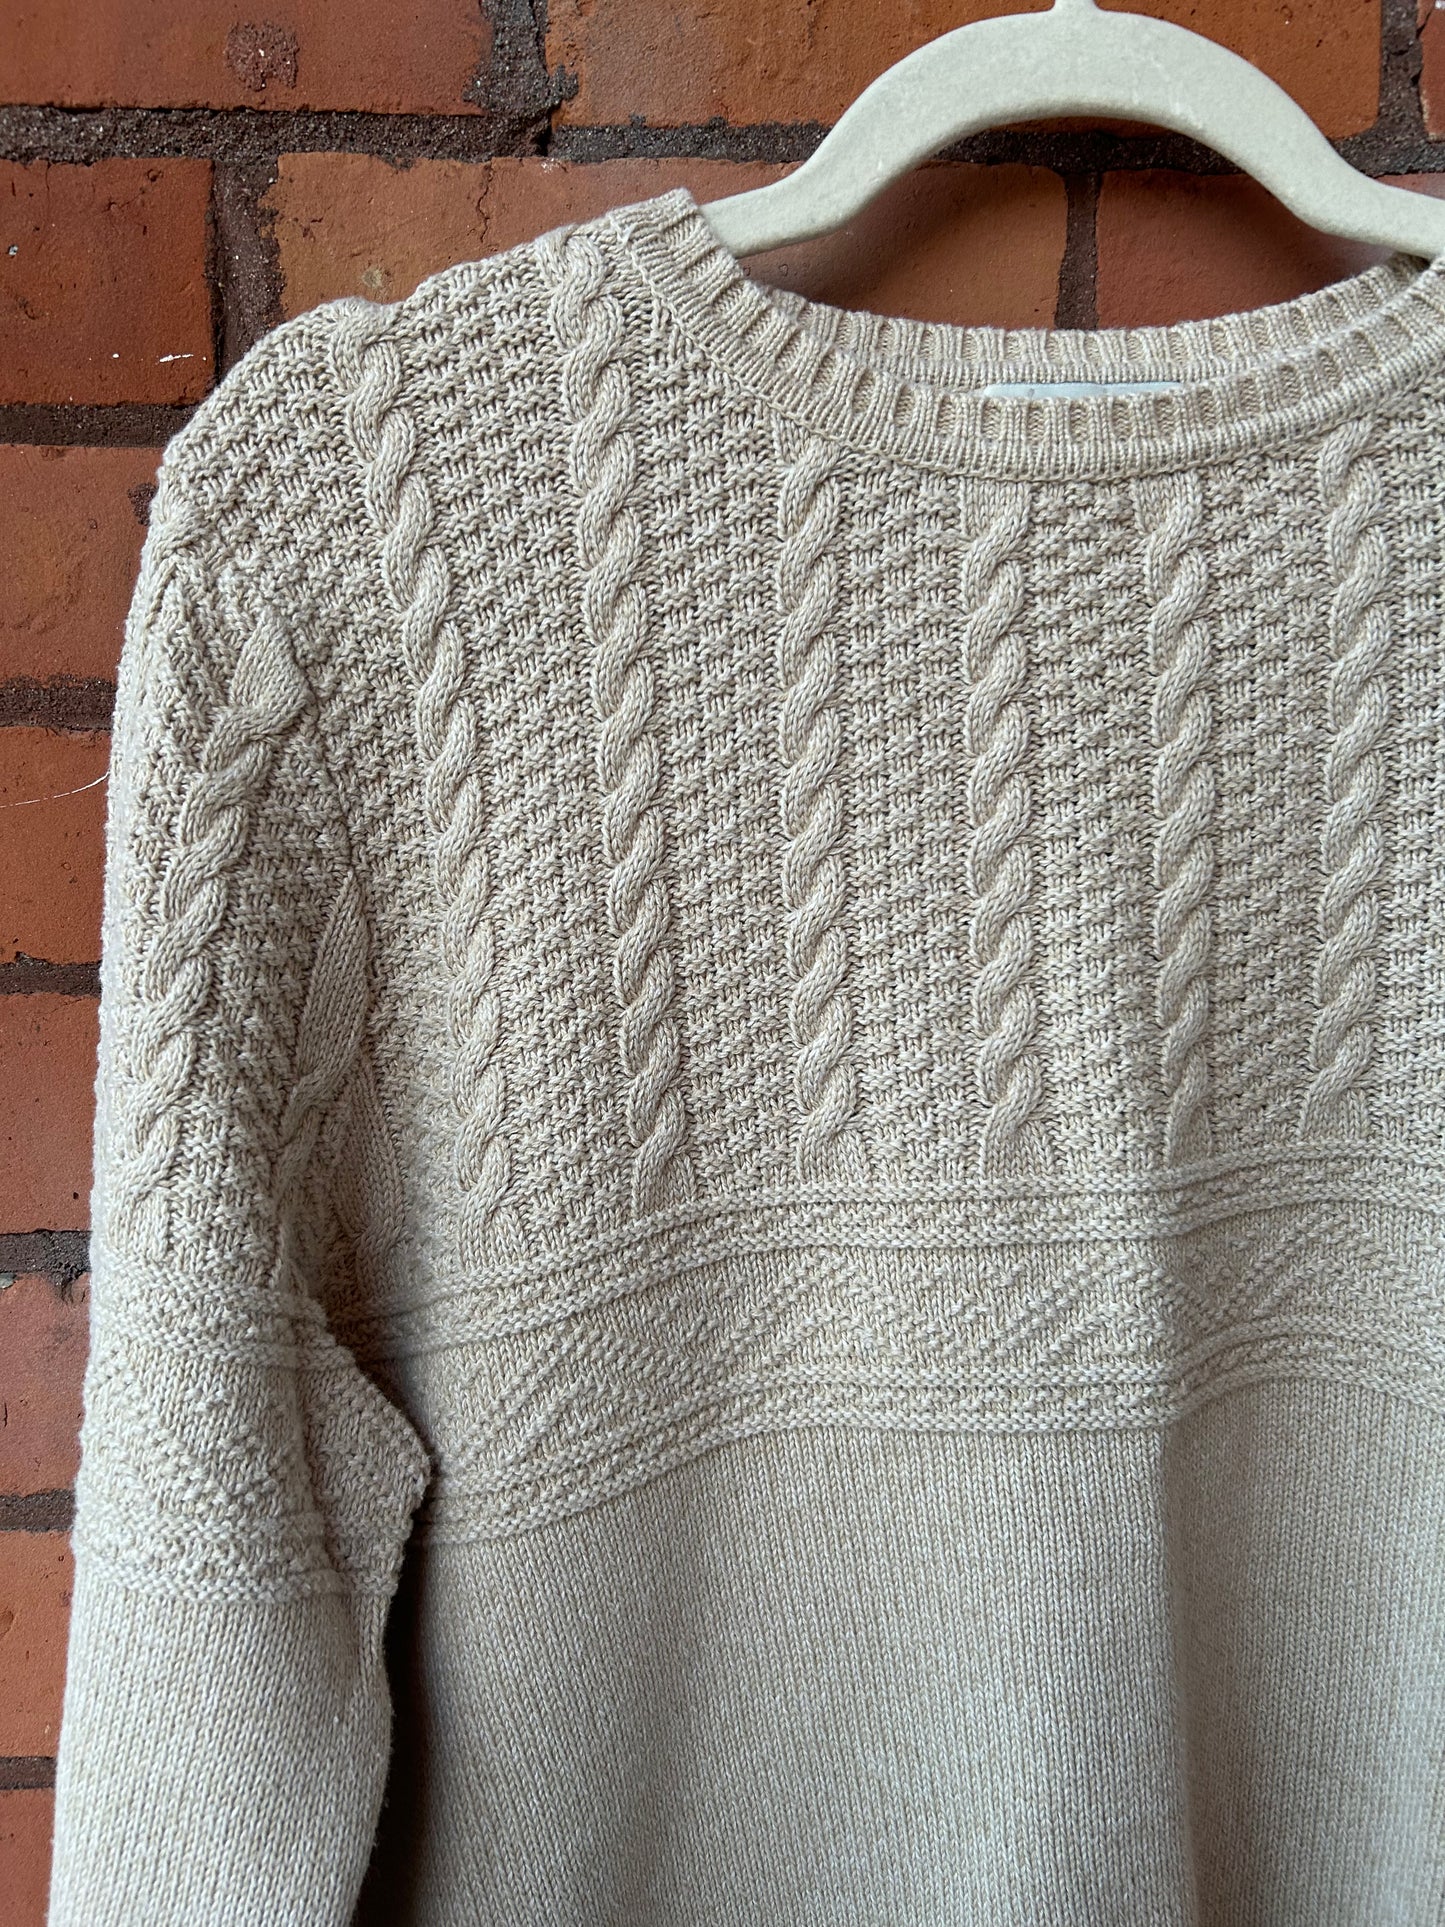 90’s Vintage Beige Boxy Cropped Cable Knit Sweater / Size L